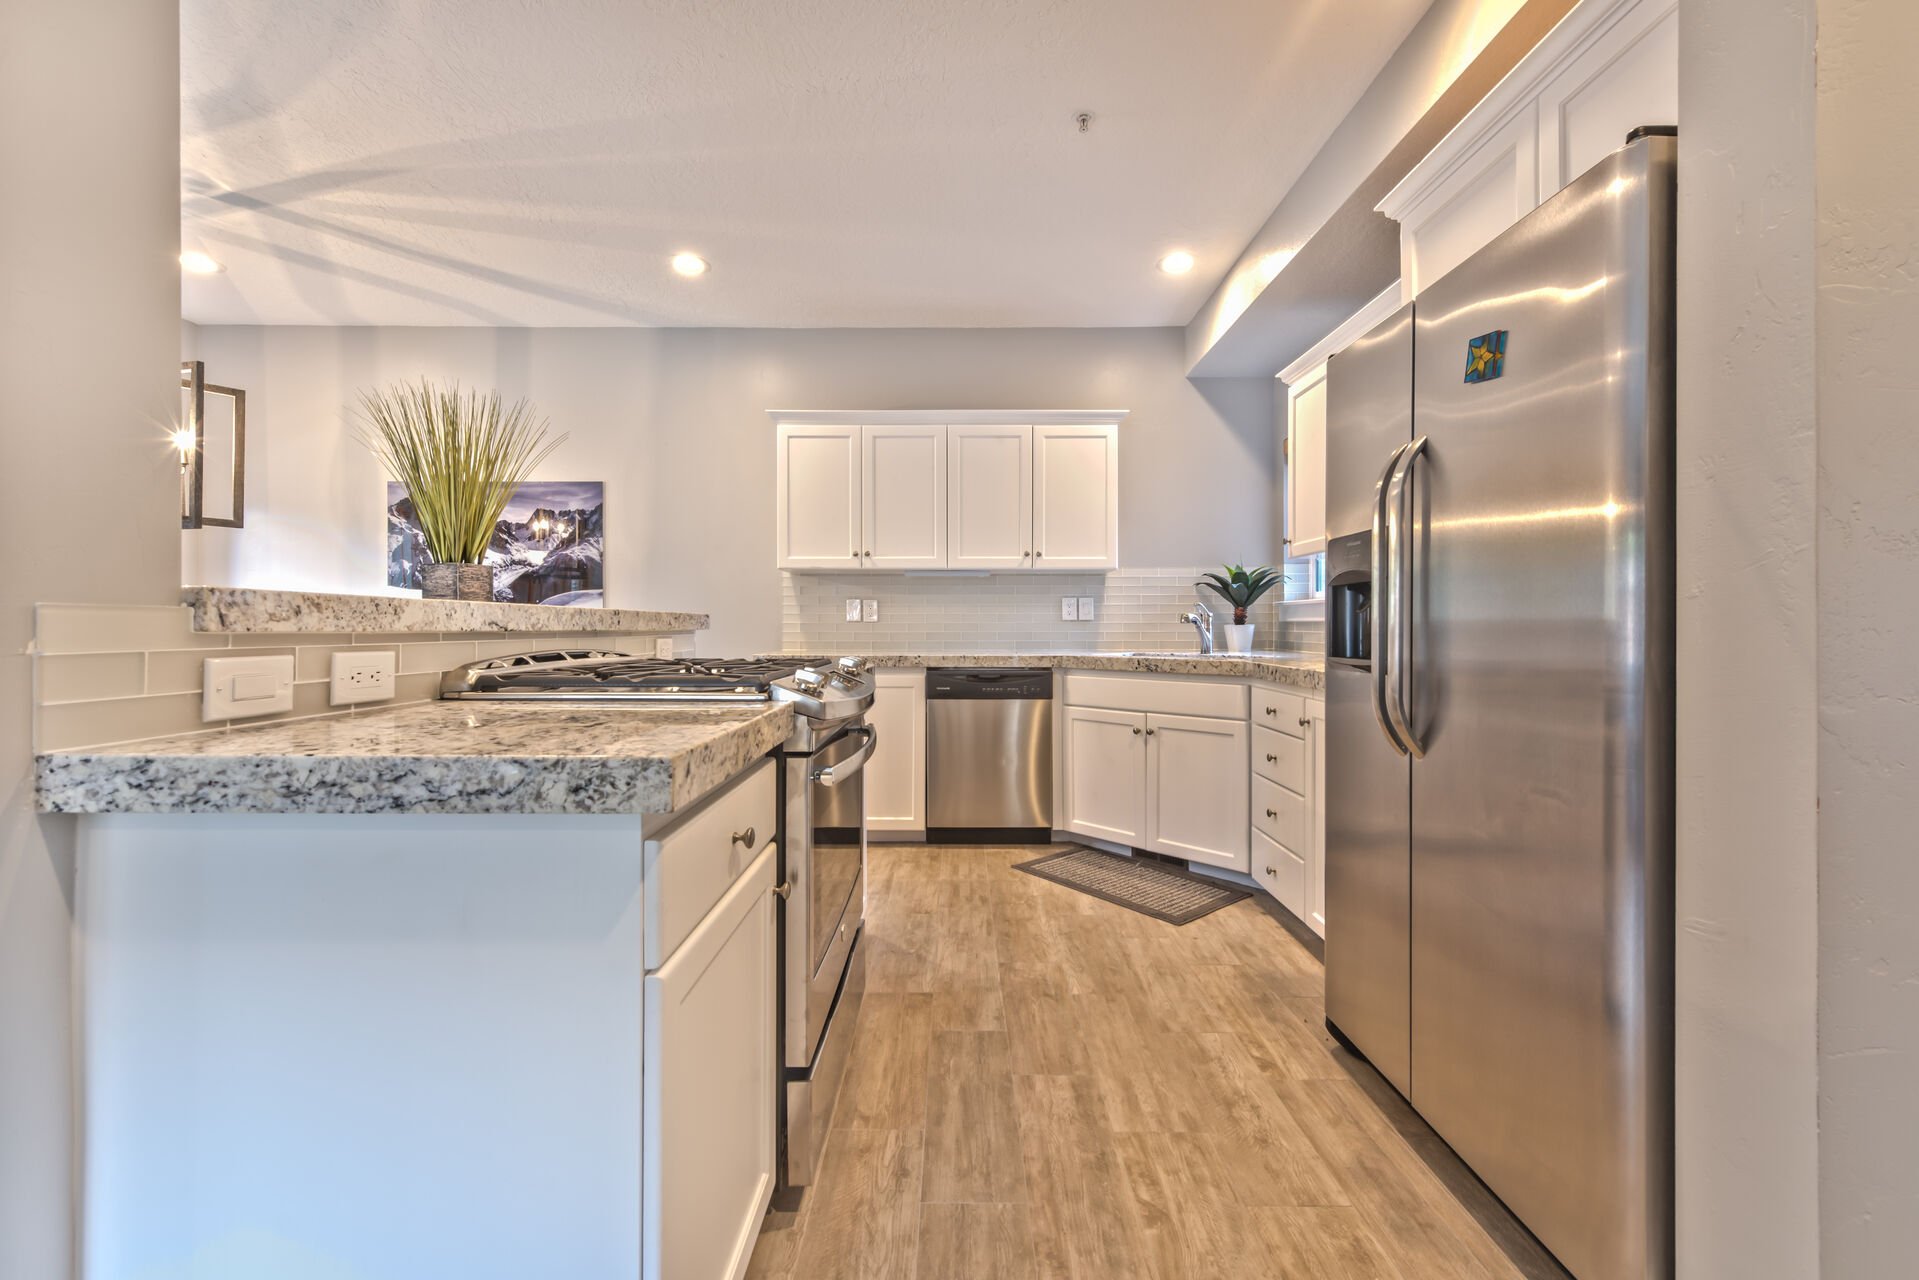 All New Fully Equipped Kitchen with High-end Finishes, Stainless Steel Appliances, and a 5-Burner Gas Range